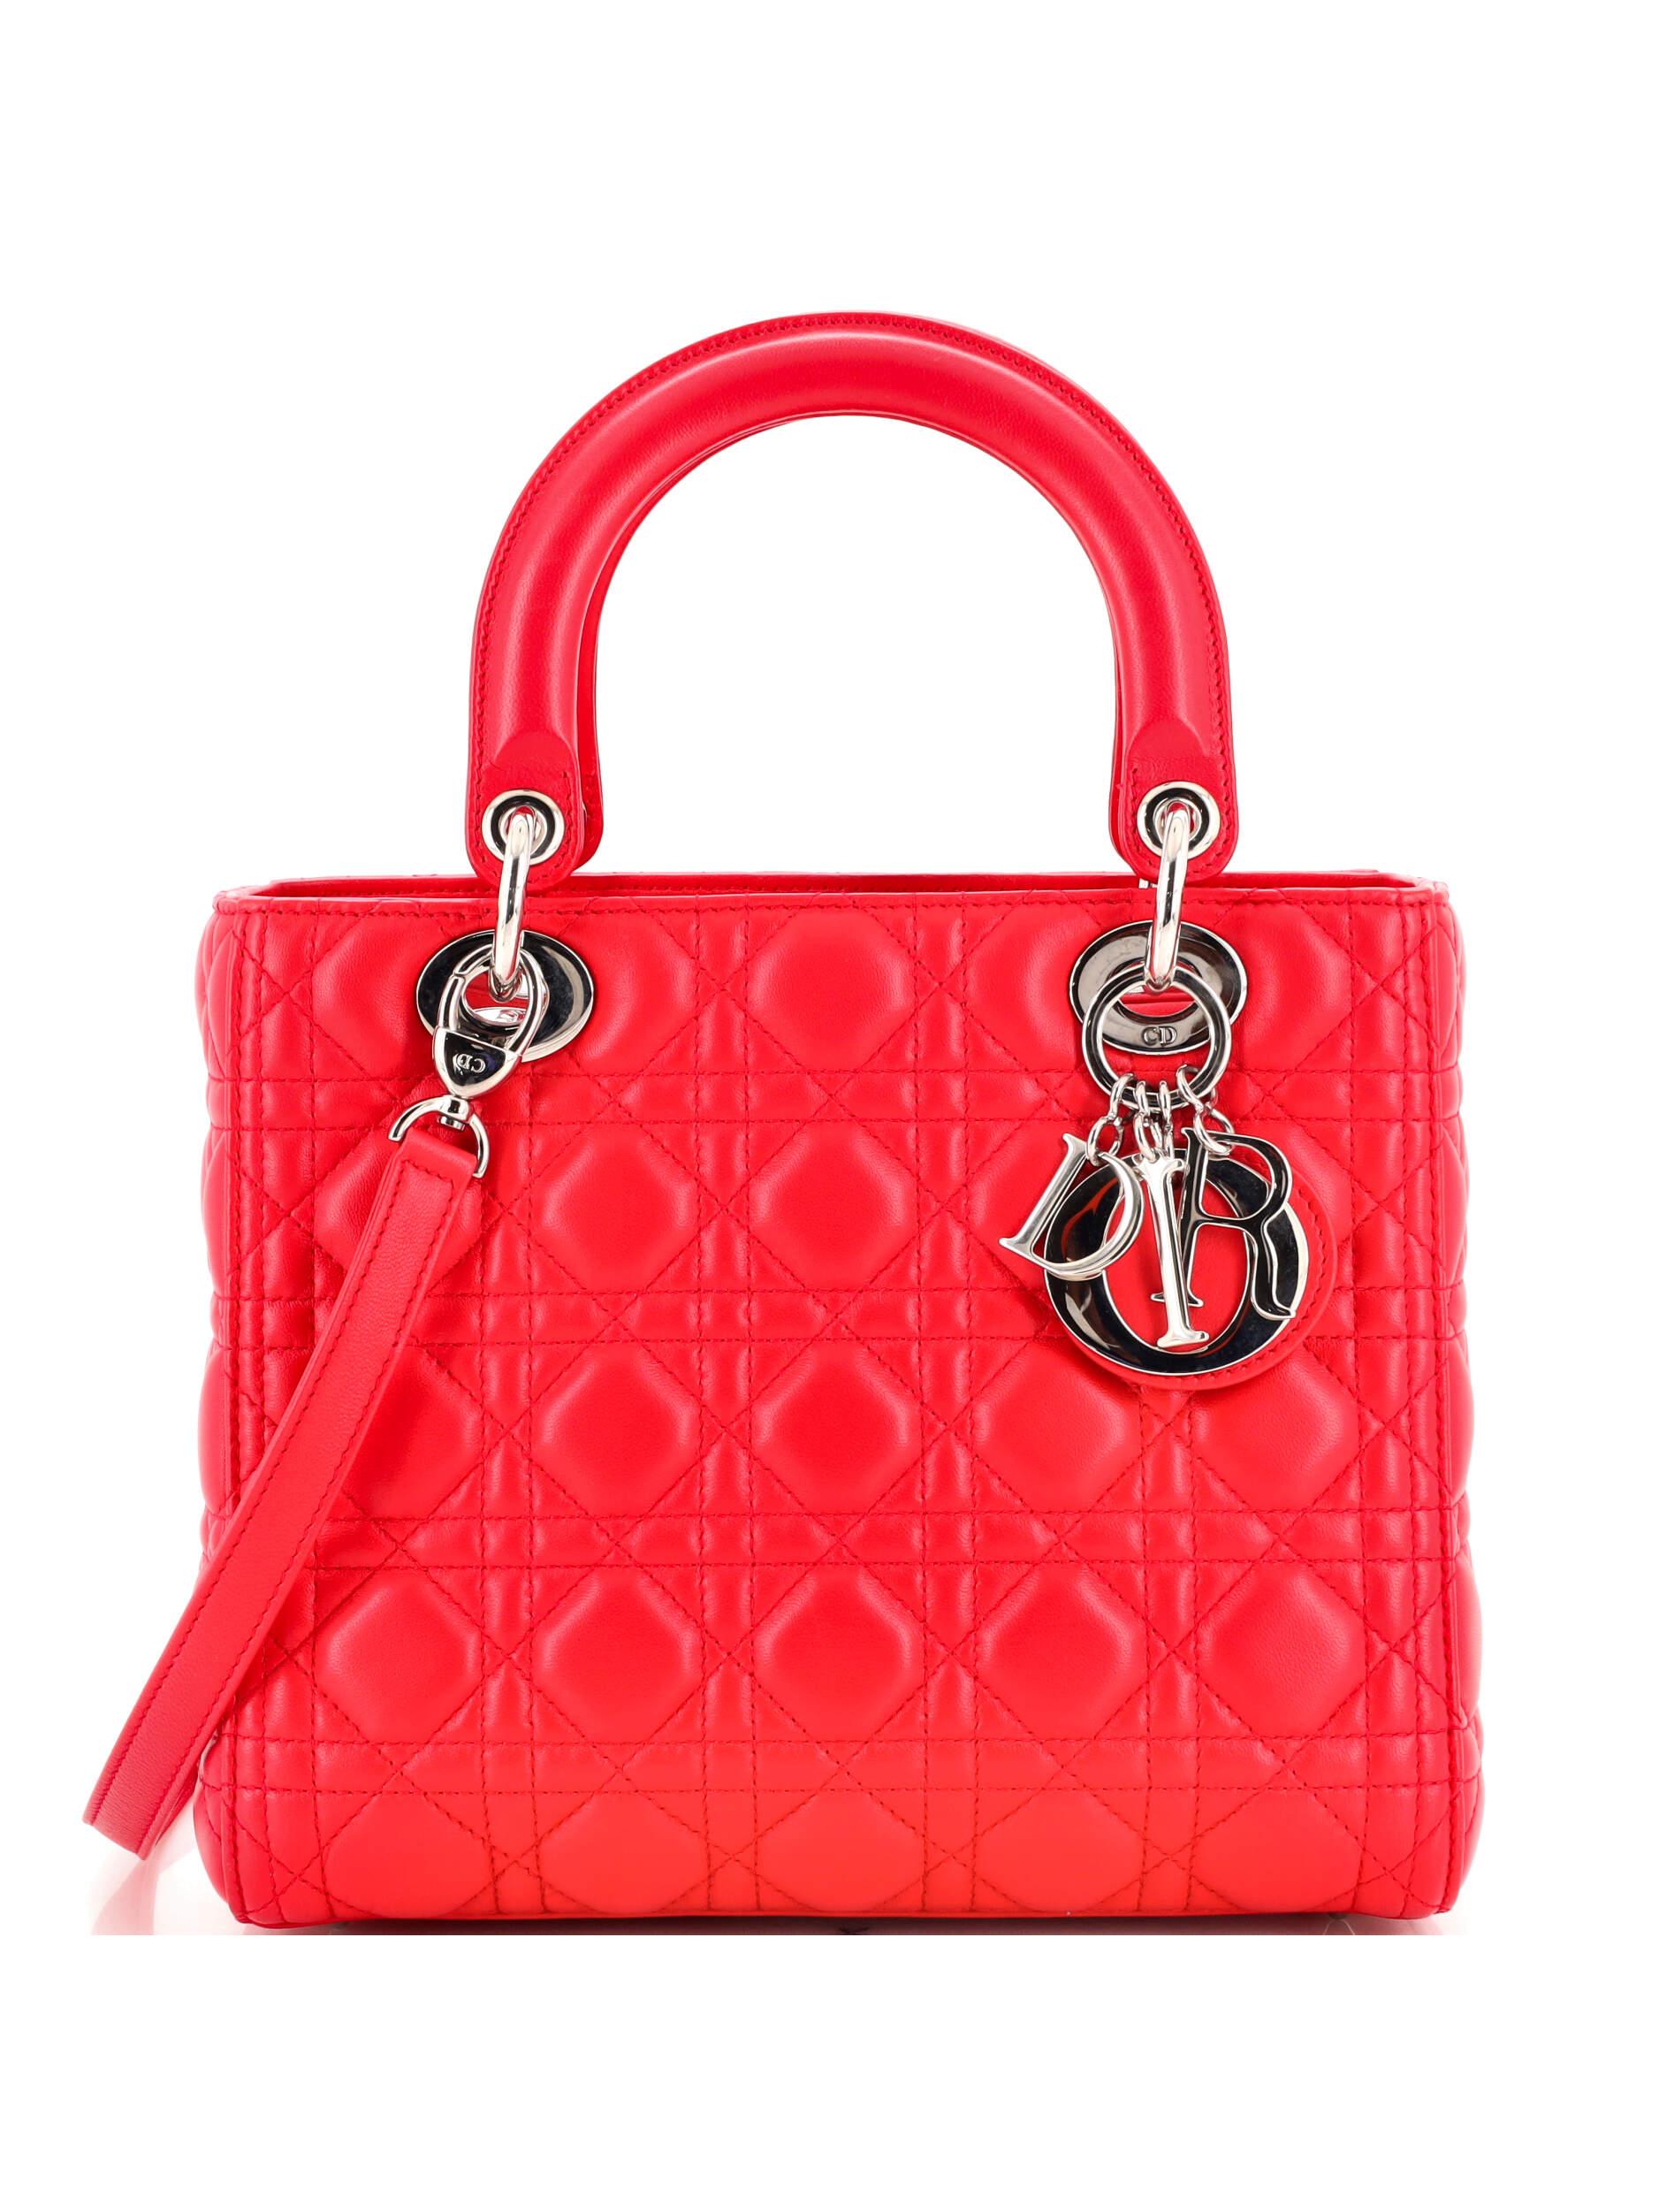 Christian Dior 100% Leather Red Lady Dior Bag Cannage Quilt Lambskin ...